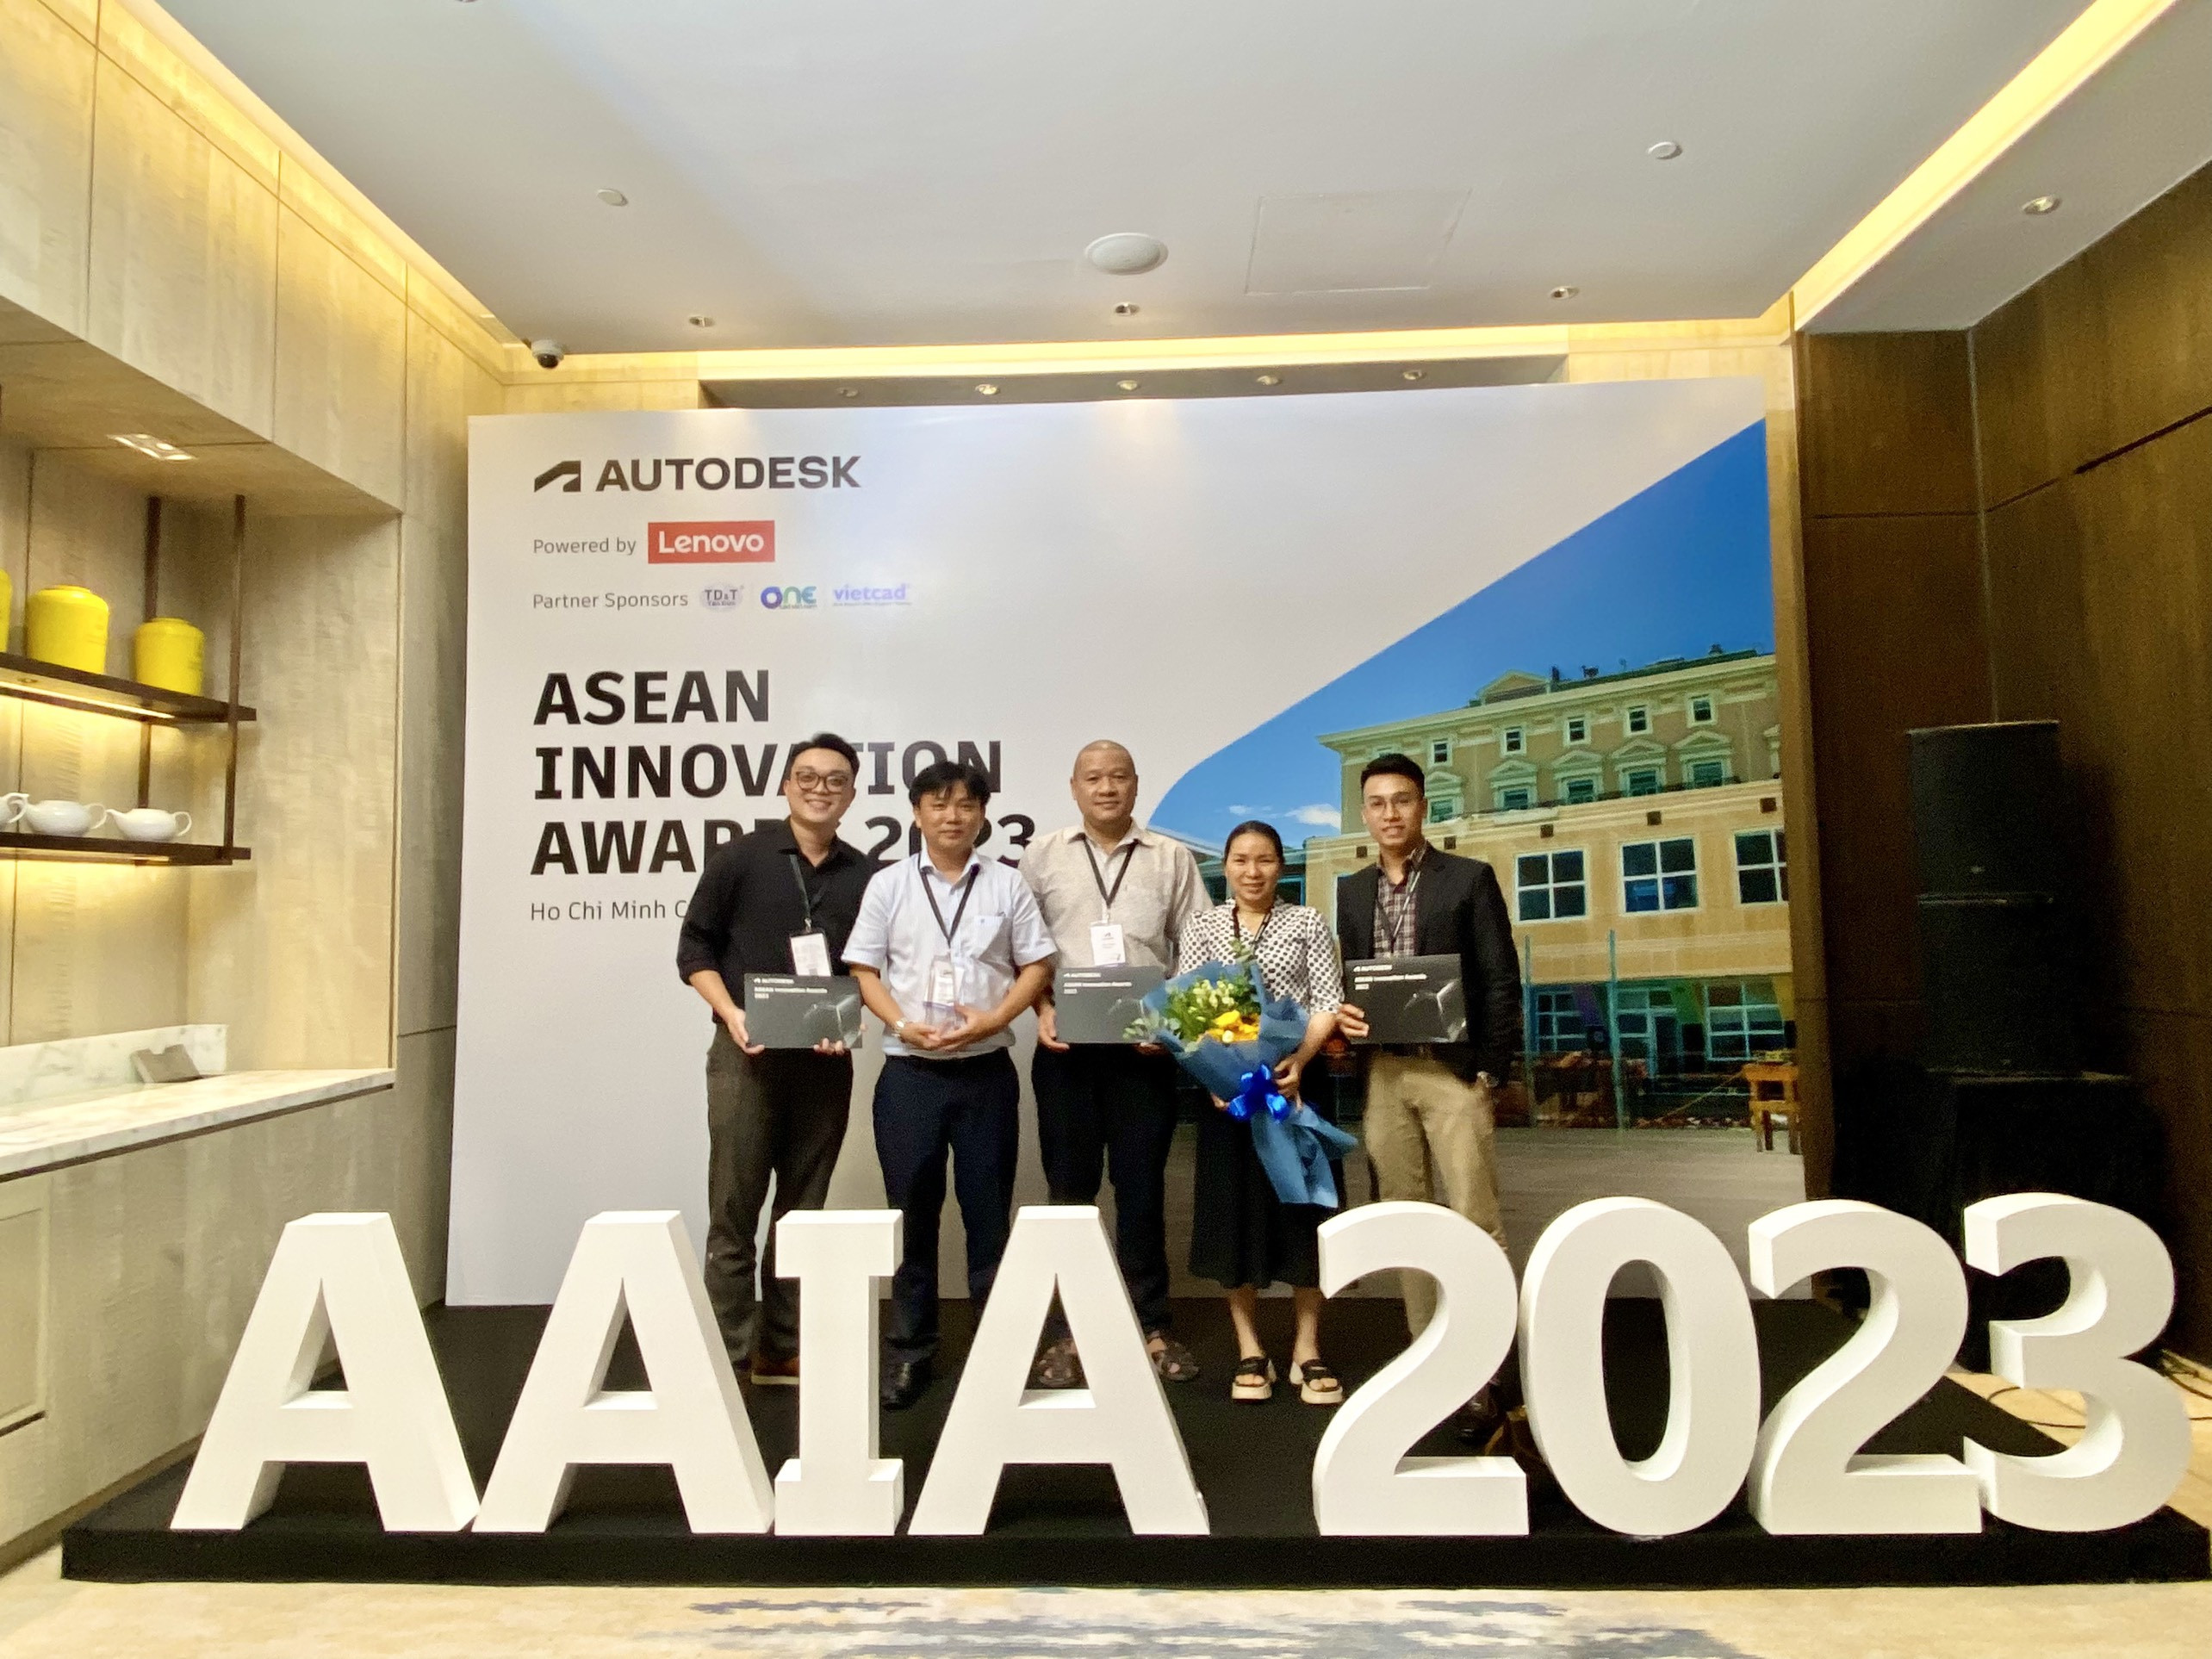 NAGECCO REACHED TOP 3 IN ASEAN INNOVATION AWARD 2023 ORGANIZED BY AUTODESK